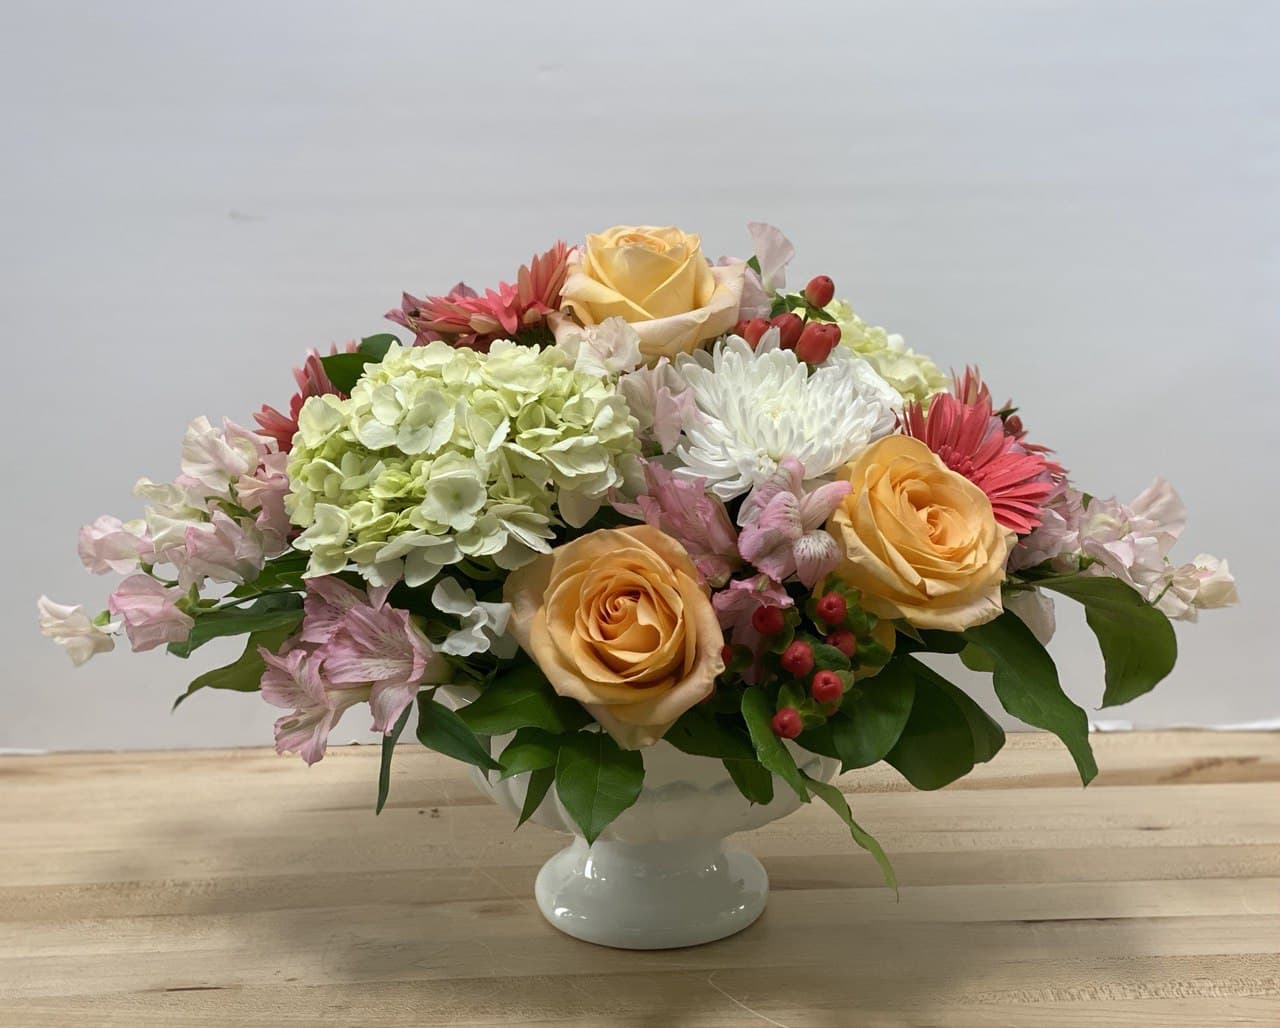 Calmness - This complimentary blend of colors in this centerpiece will bring cheer to all who view it. Suitable for any occasion.